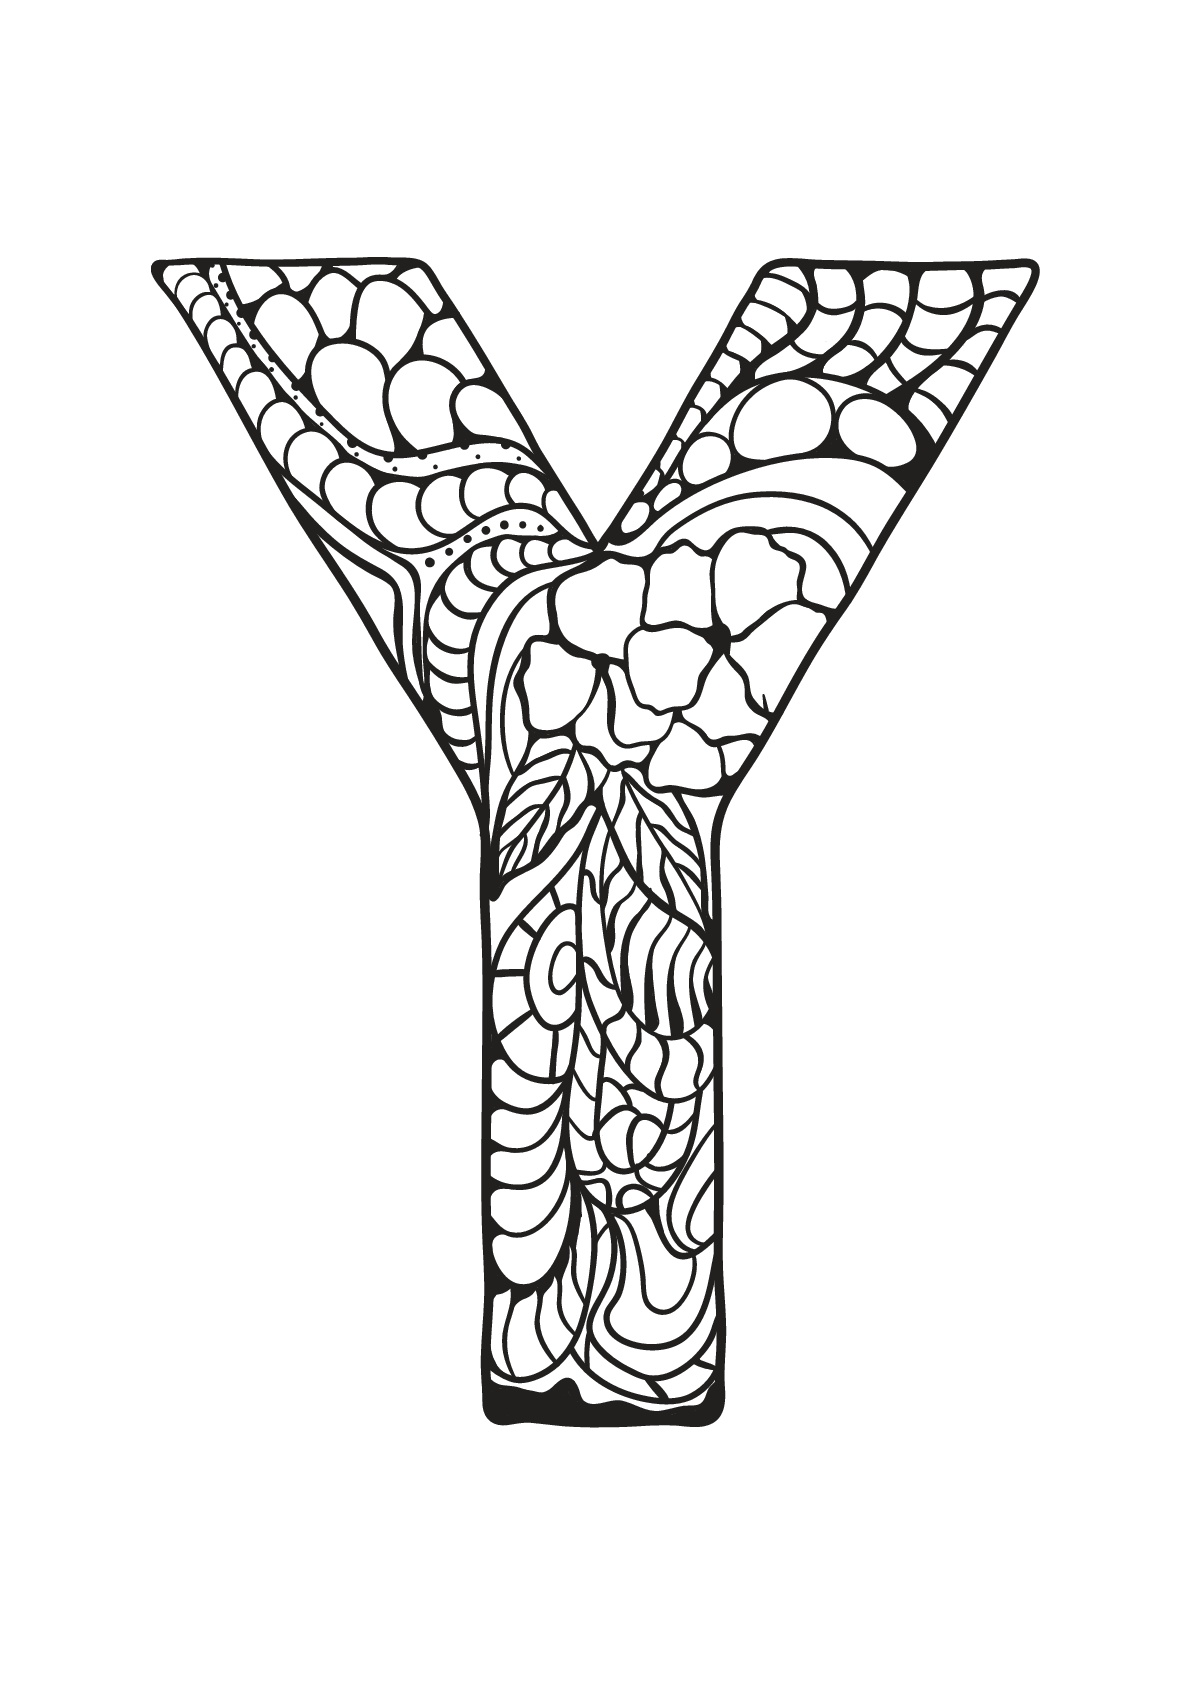 Alphabet to download : Y - Alphabet Kids Coloring Pages